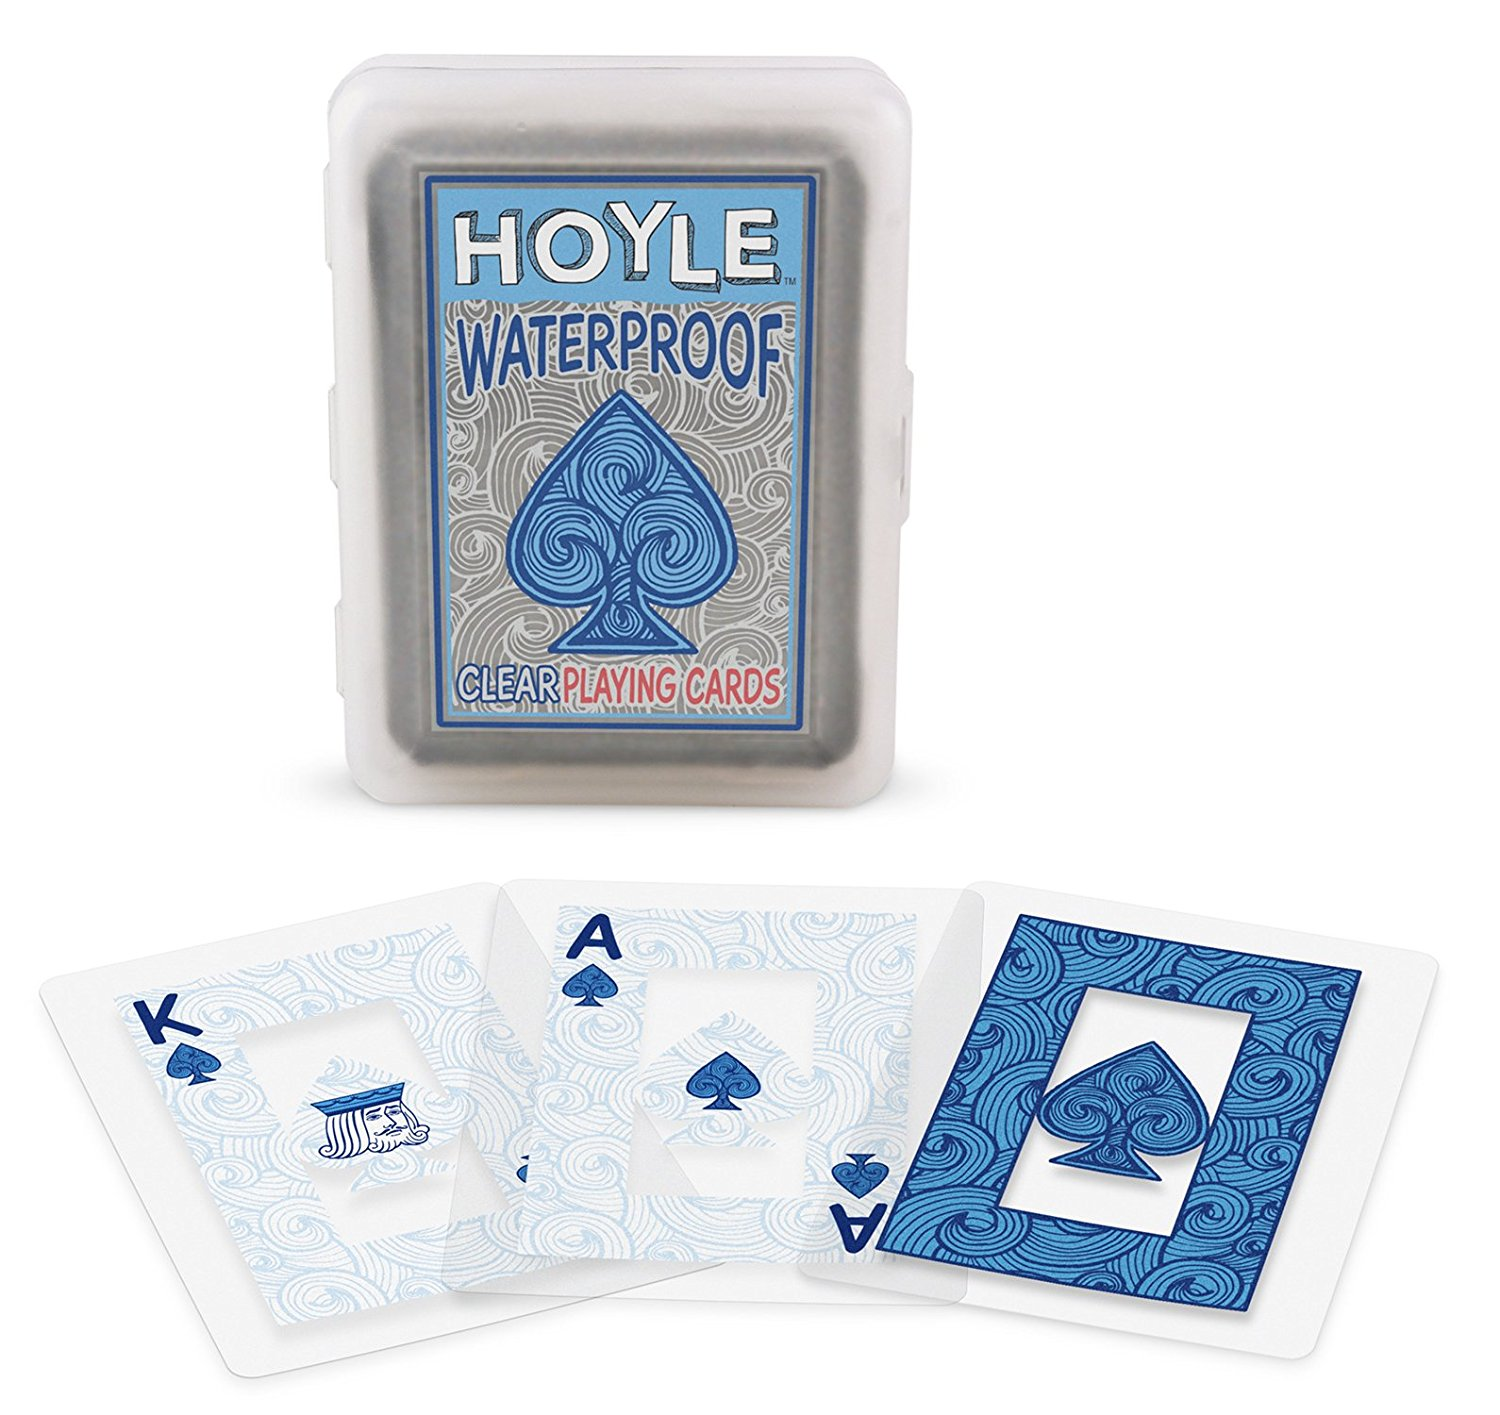 Hoyle Waterproof Clear Playing Cards Only $5.97!